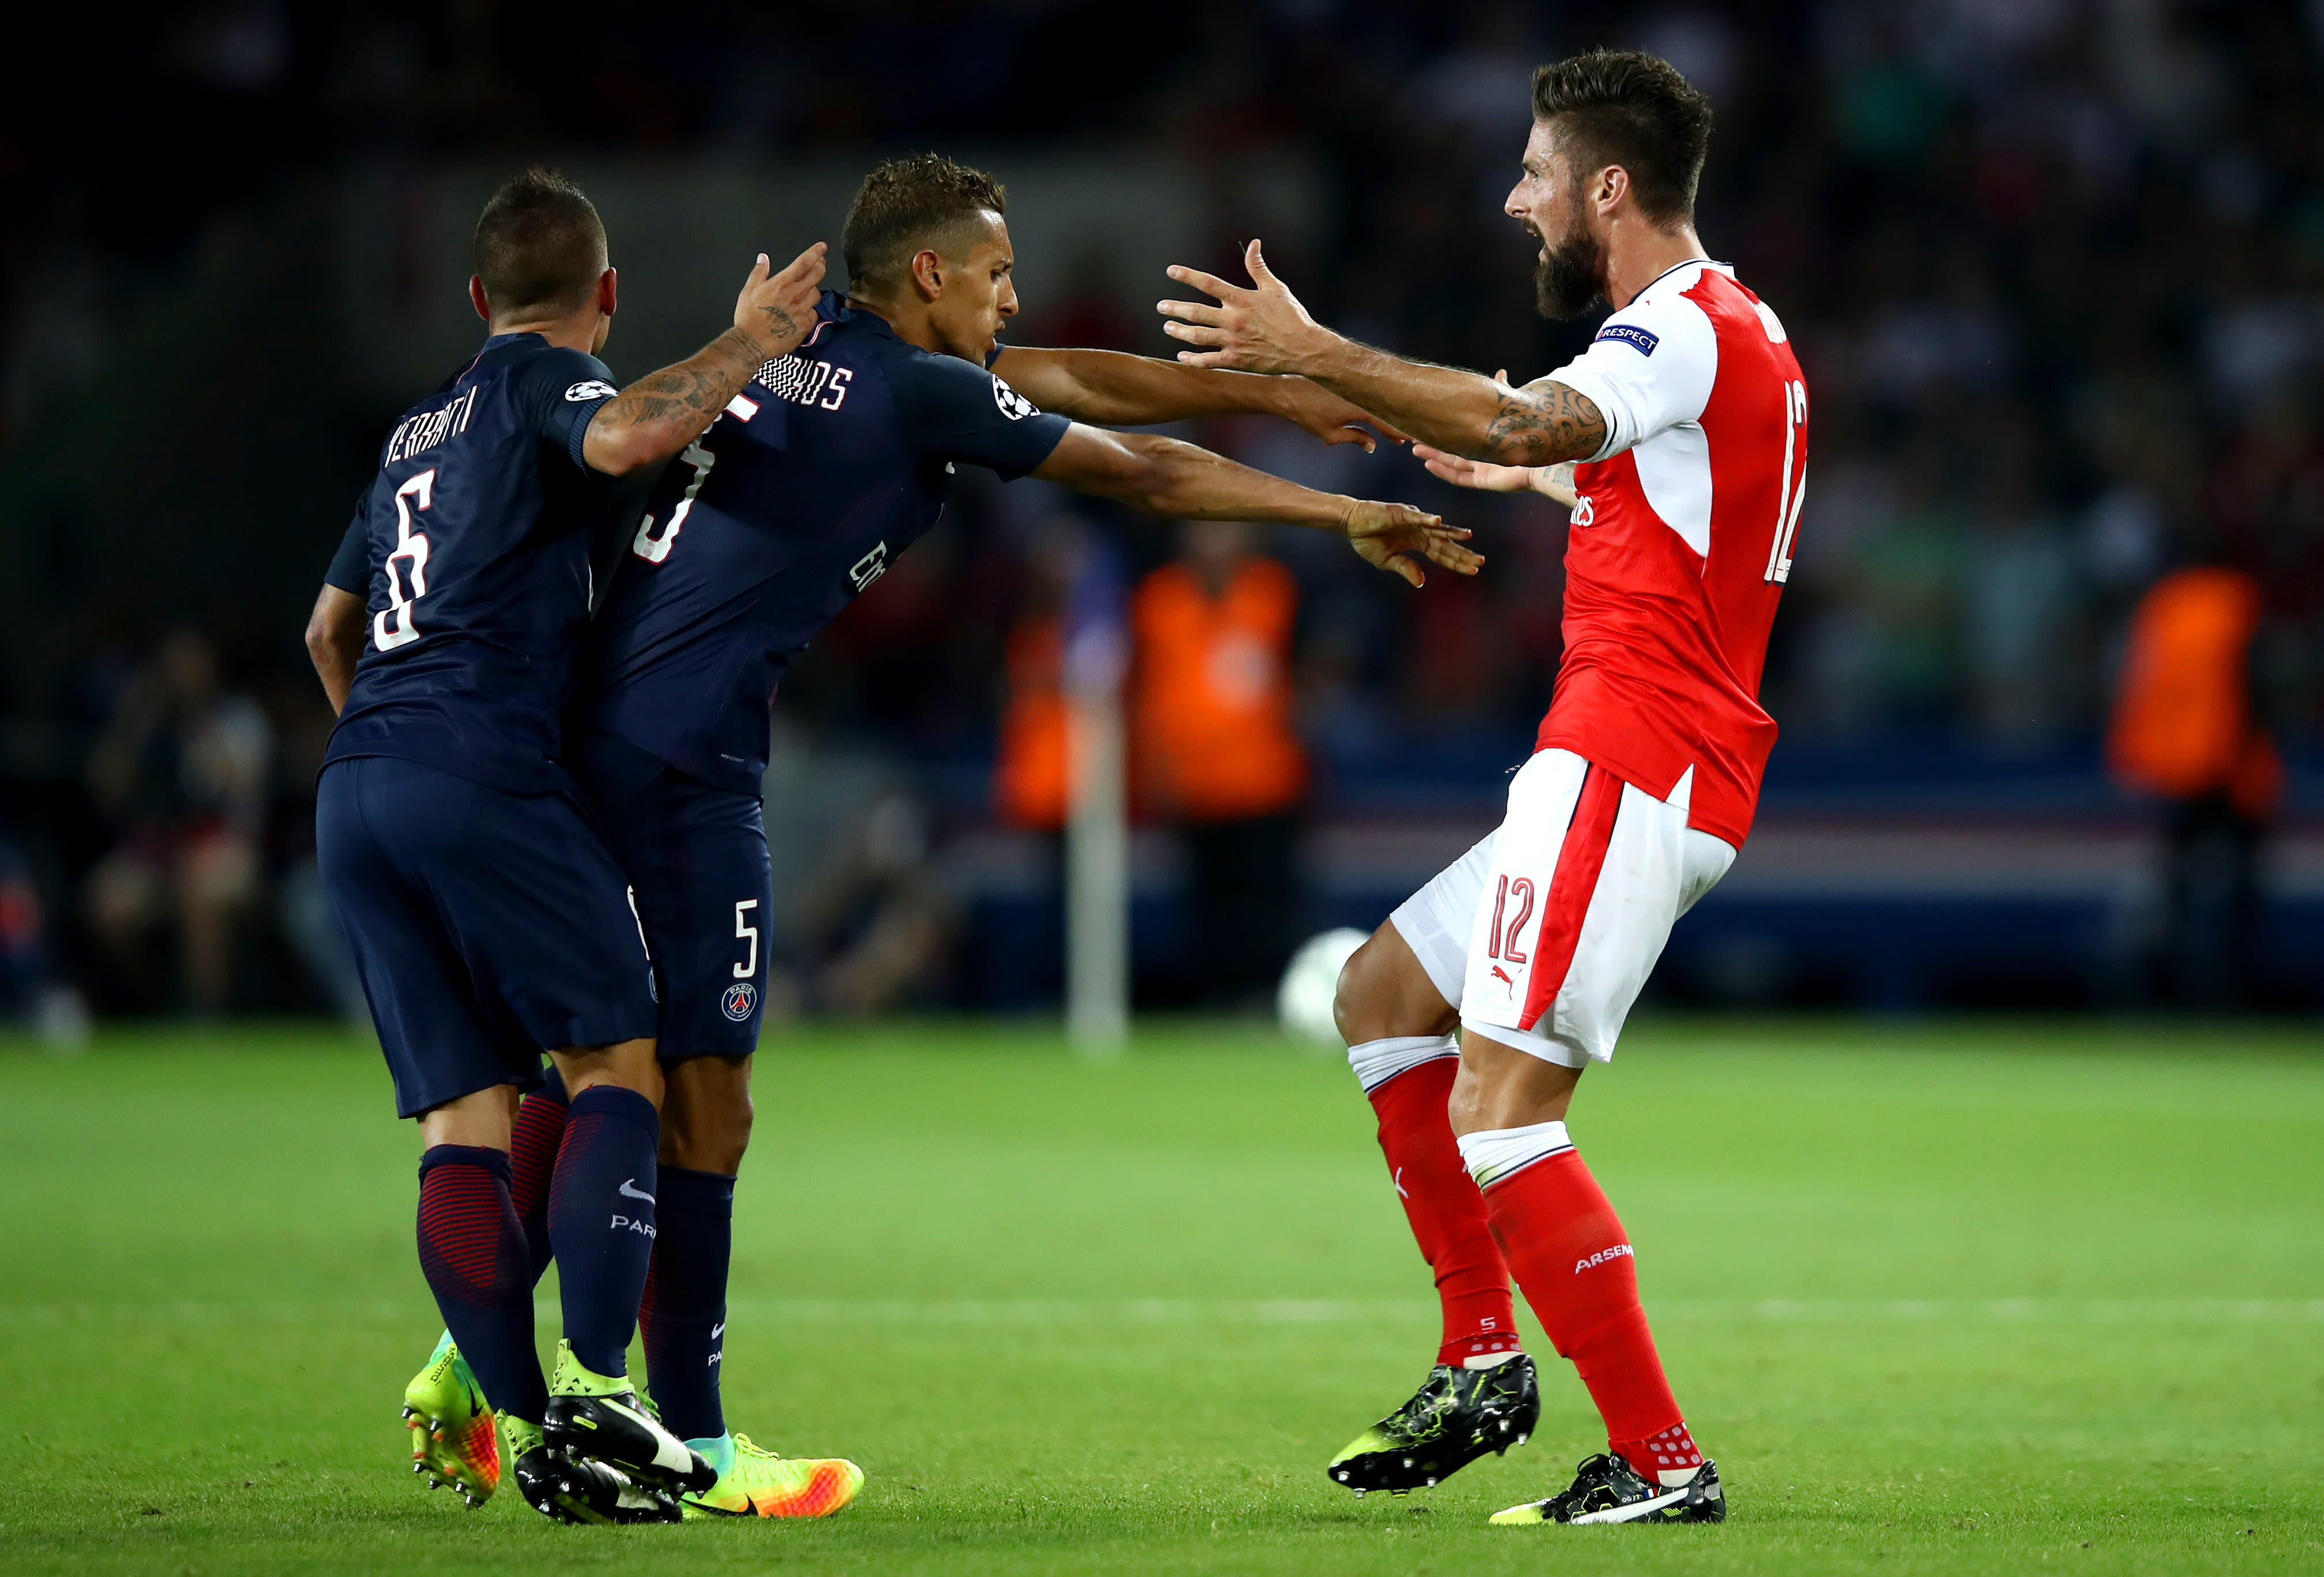 Arsenal, PSG To Battle For Top Spot